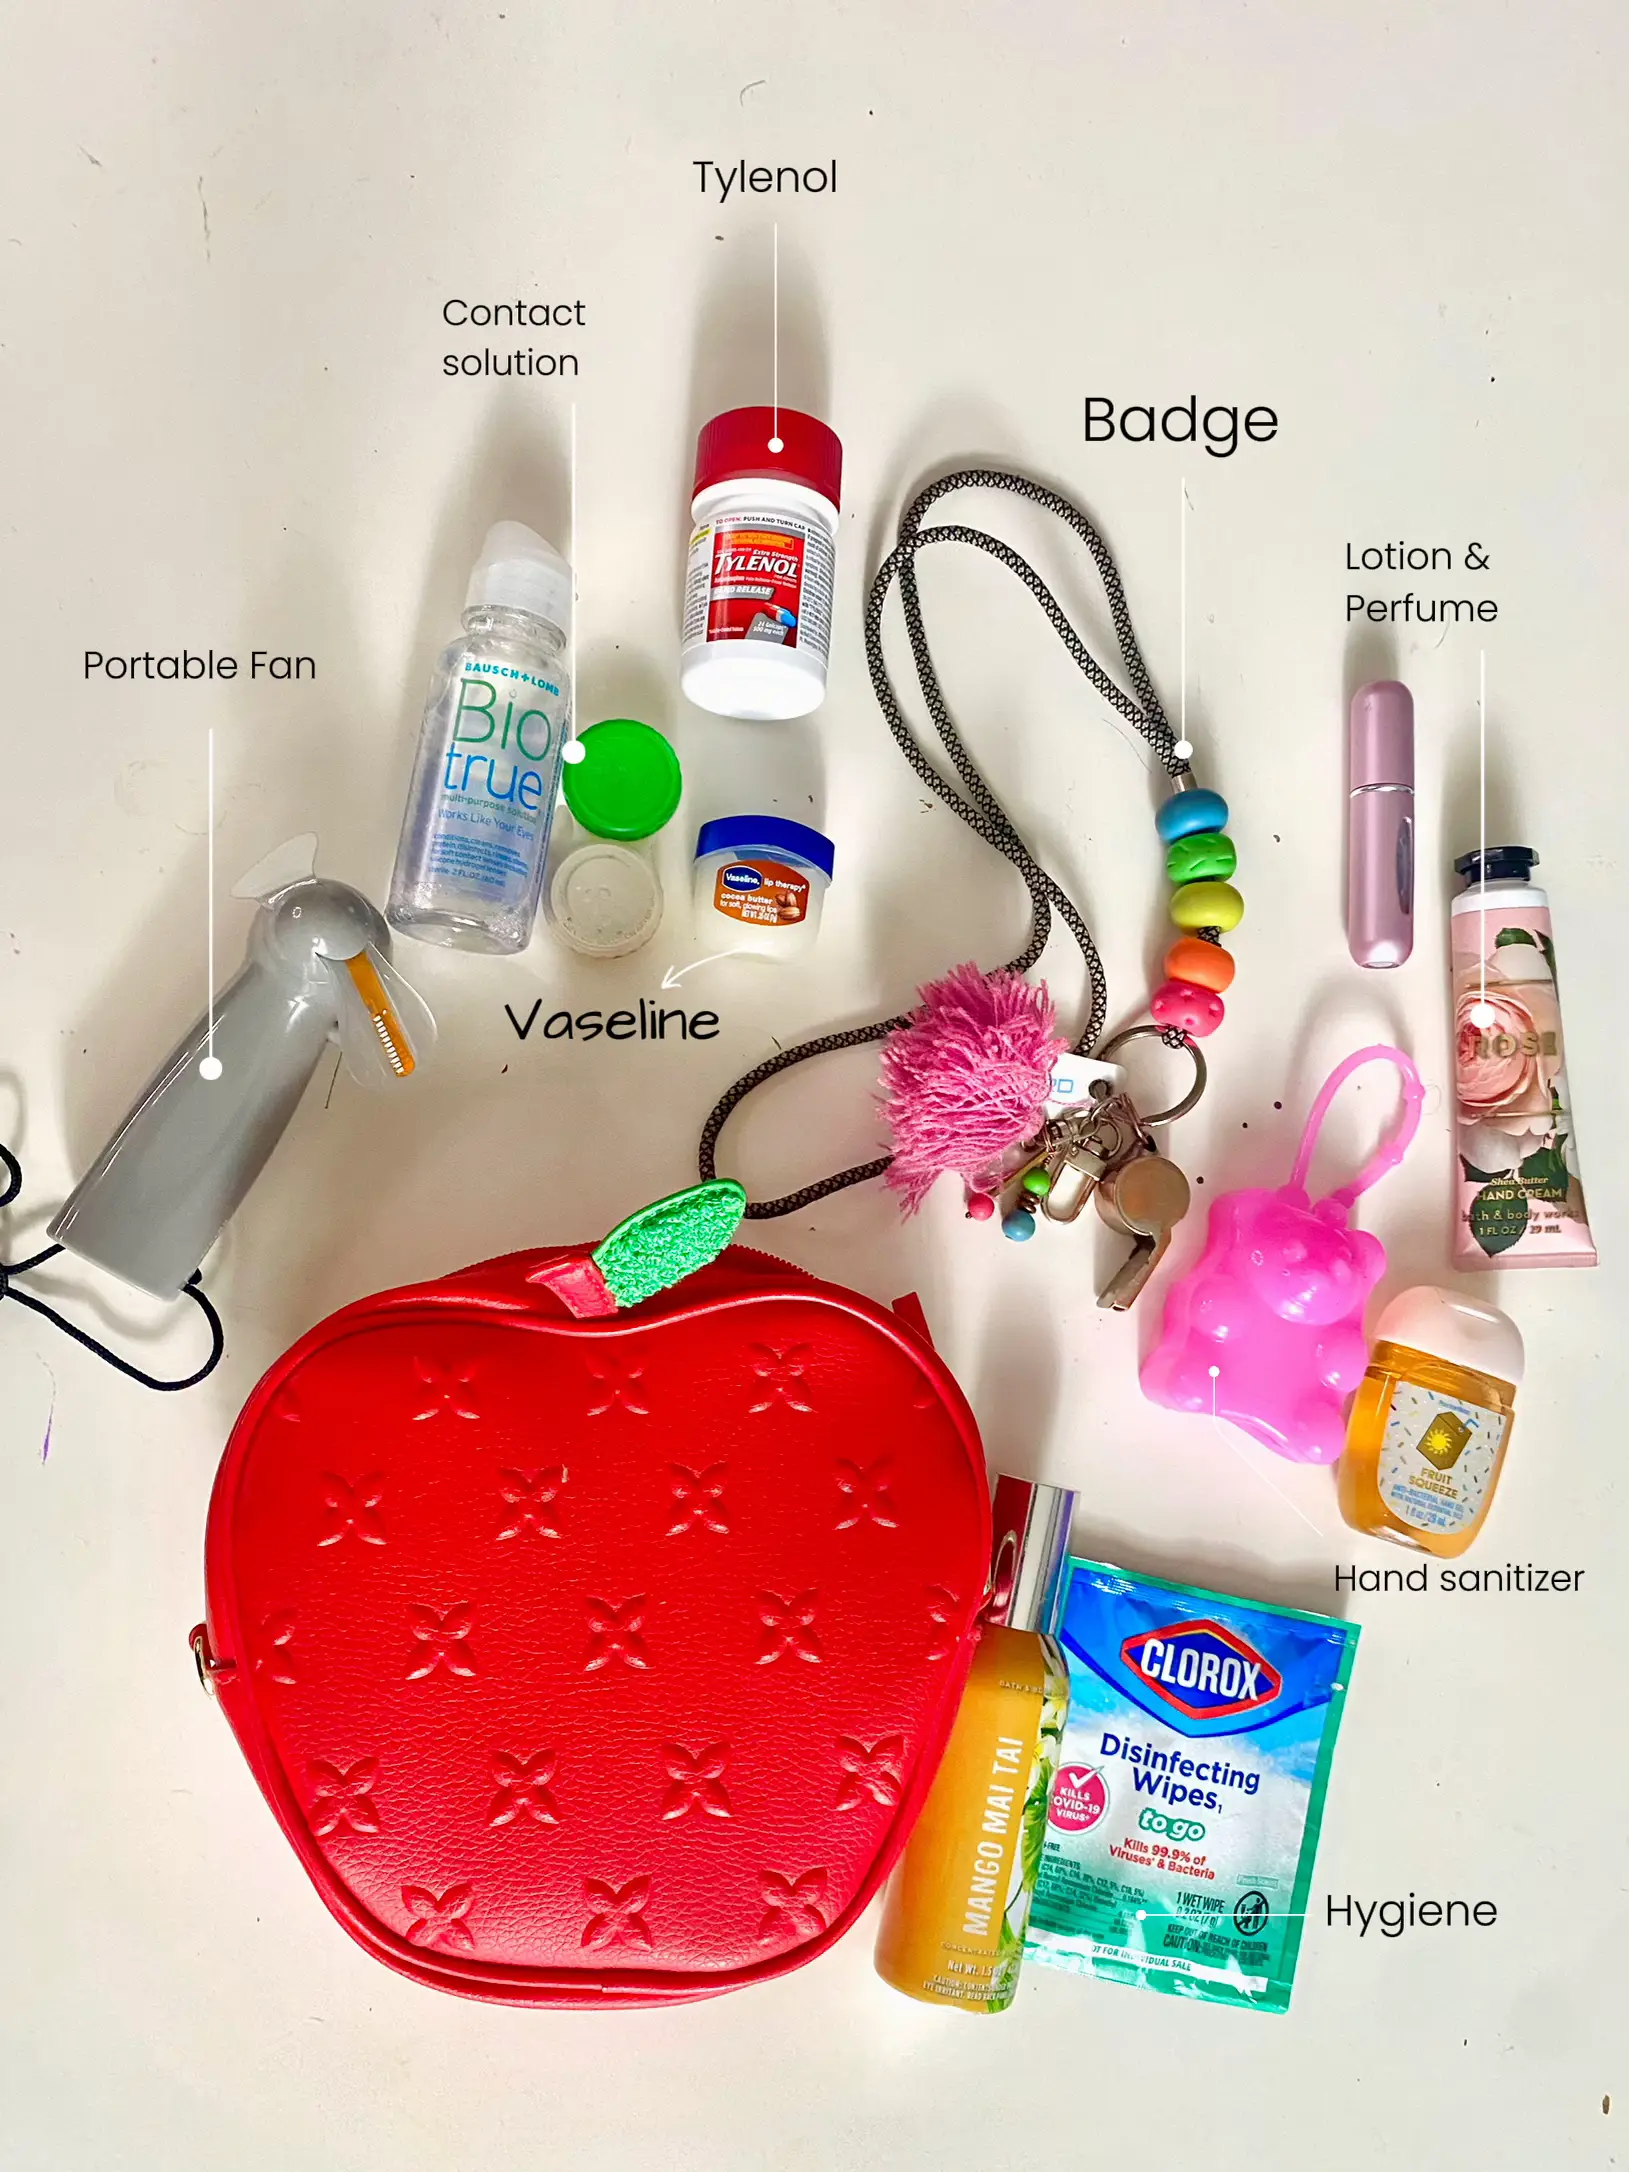  A collection of personal care items including a bottle of hand sanitizer and a badge